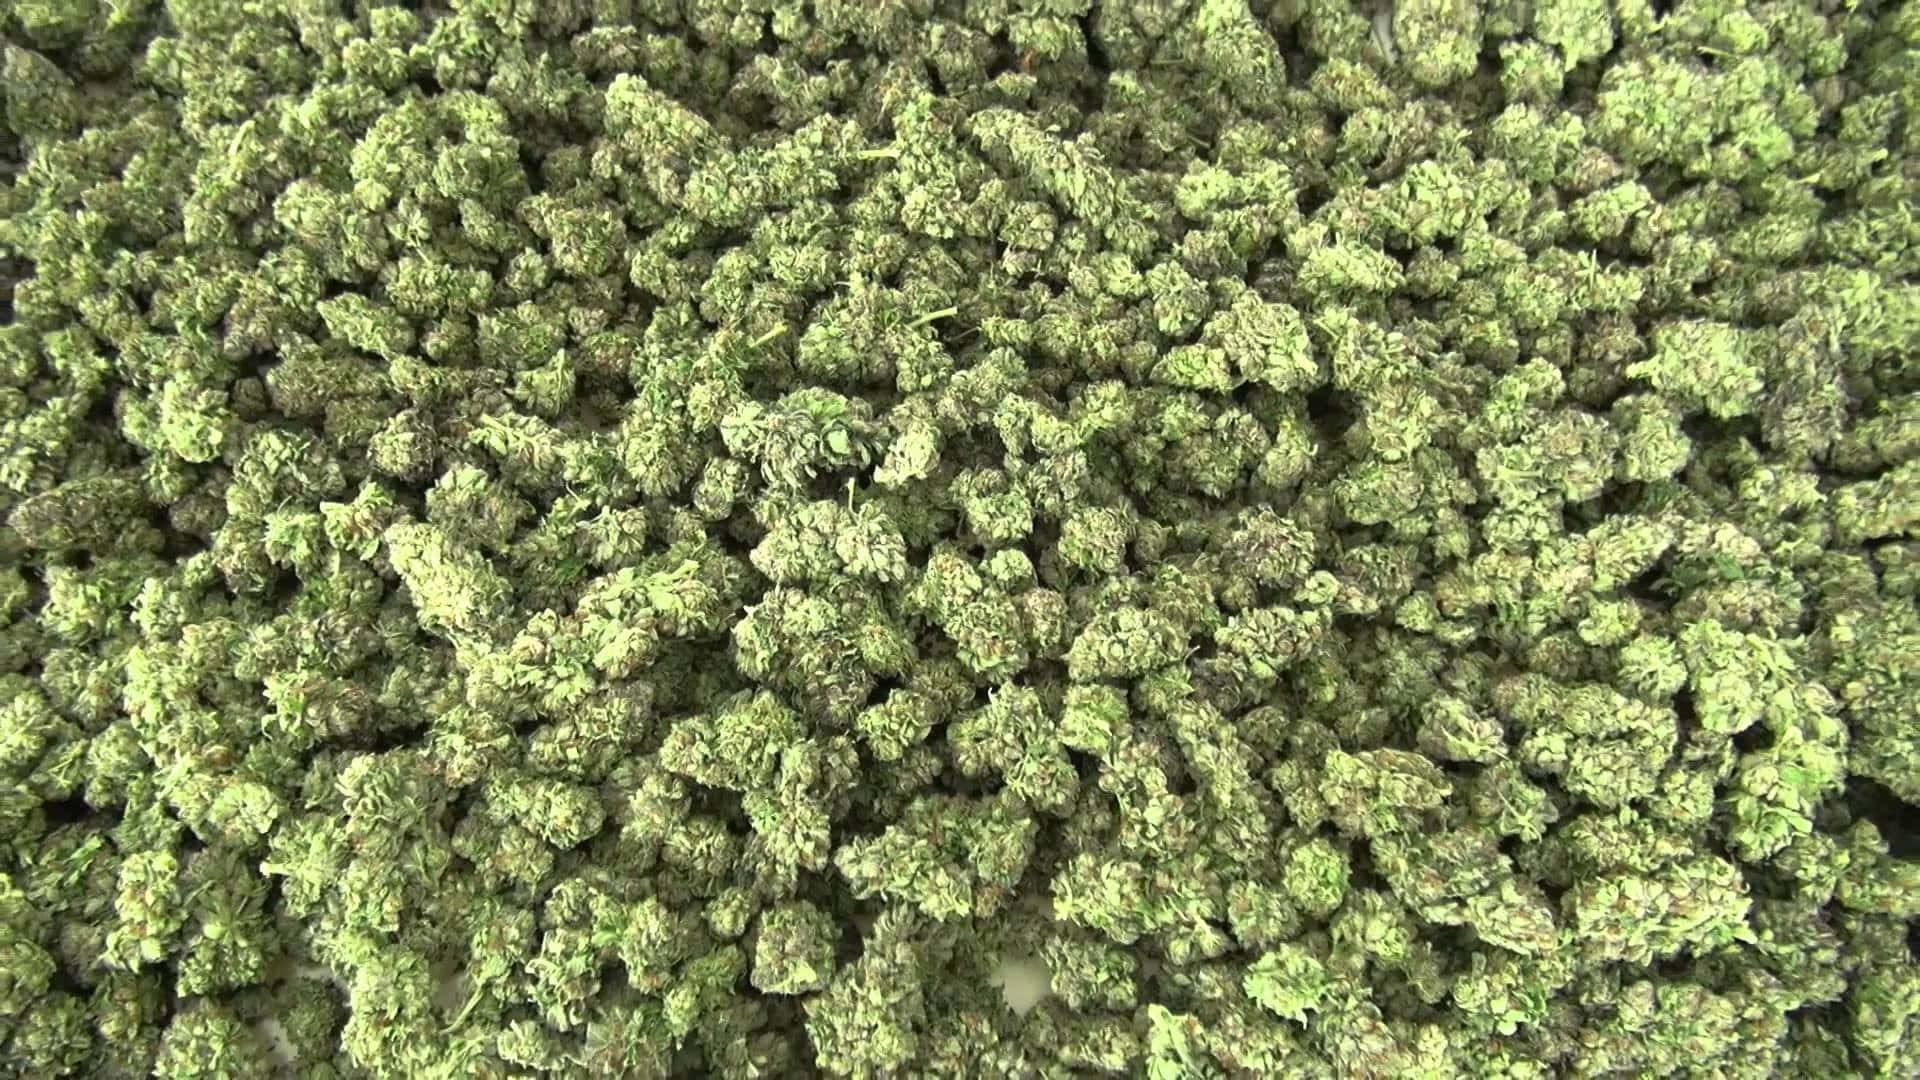 Green Cannabis Buds Picture